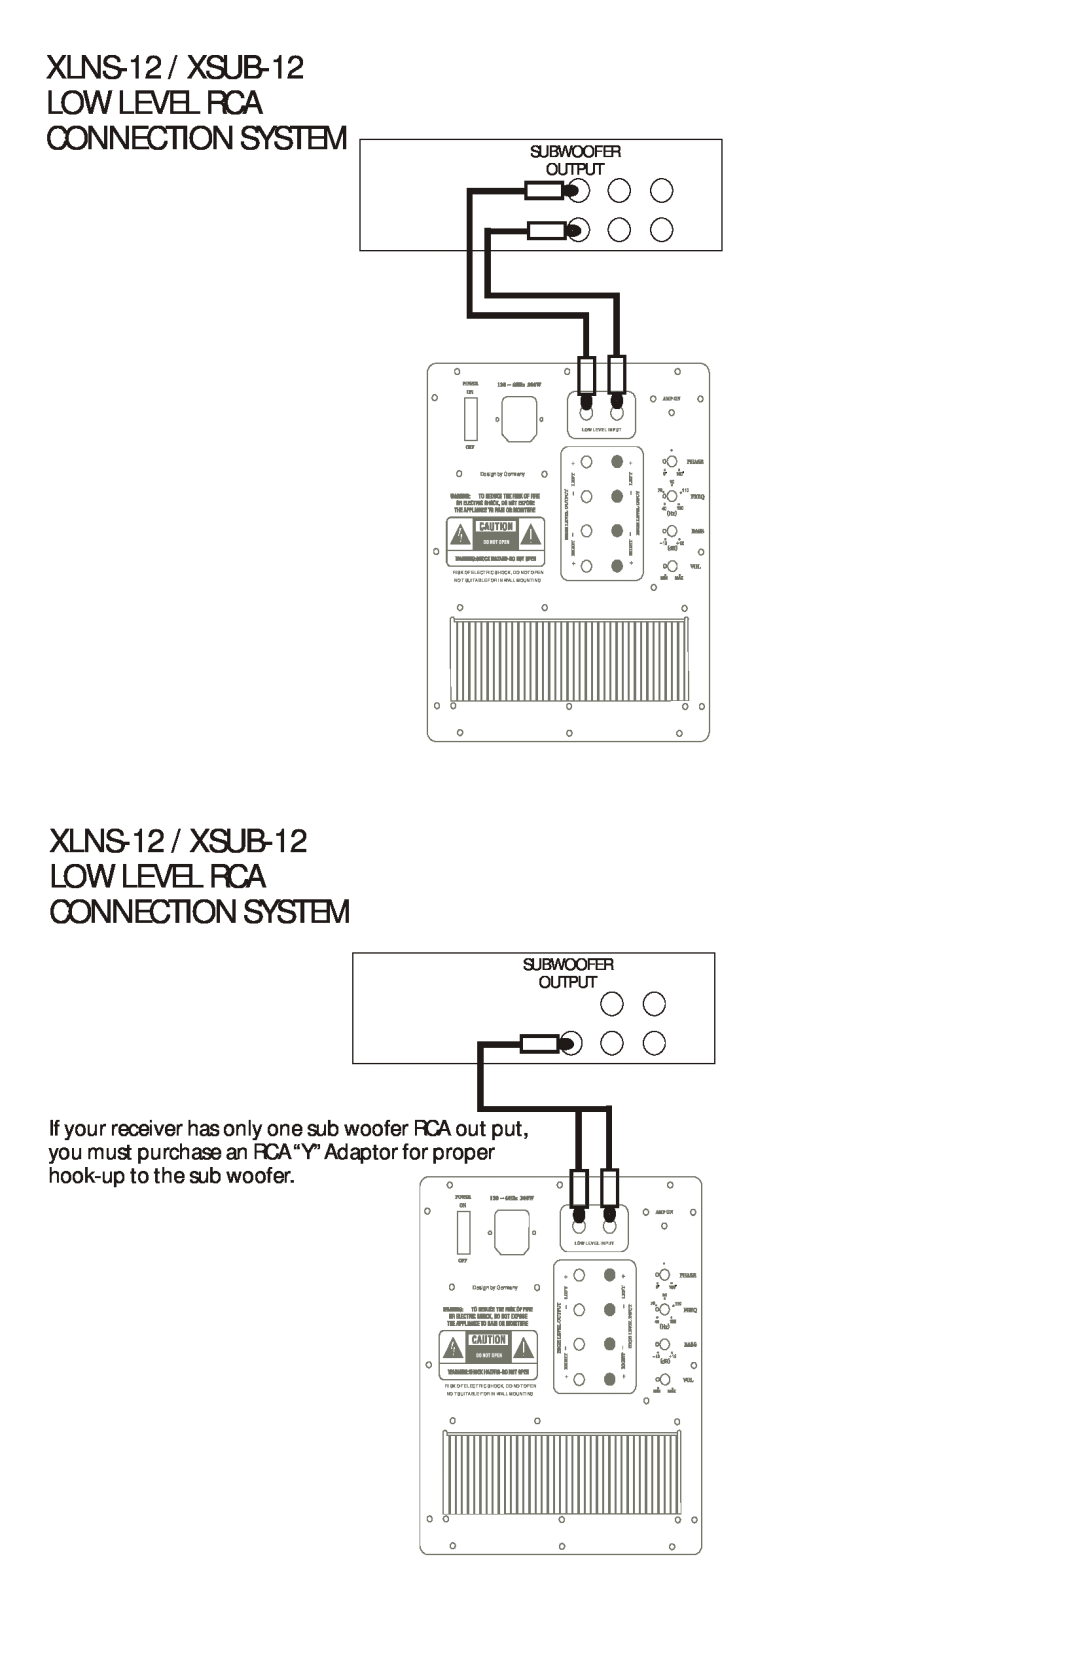 Cadence manual XLNS-12 / XSUB-12 LOW LEVEL RCA CONNECTION SYSTEM, Subwoofer Output, Design by Germany 